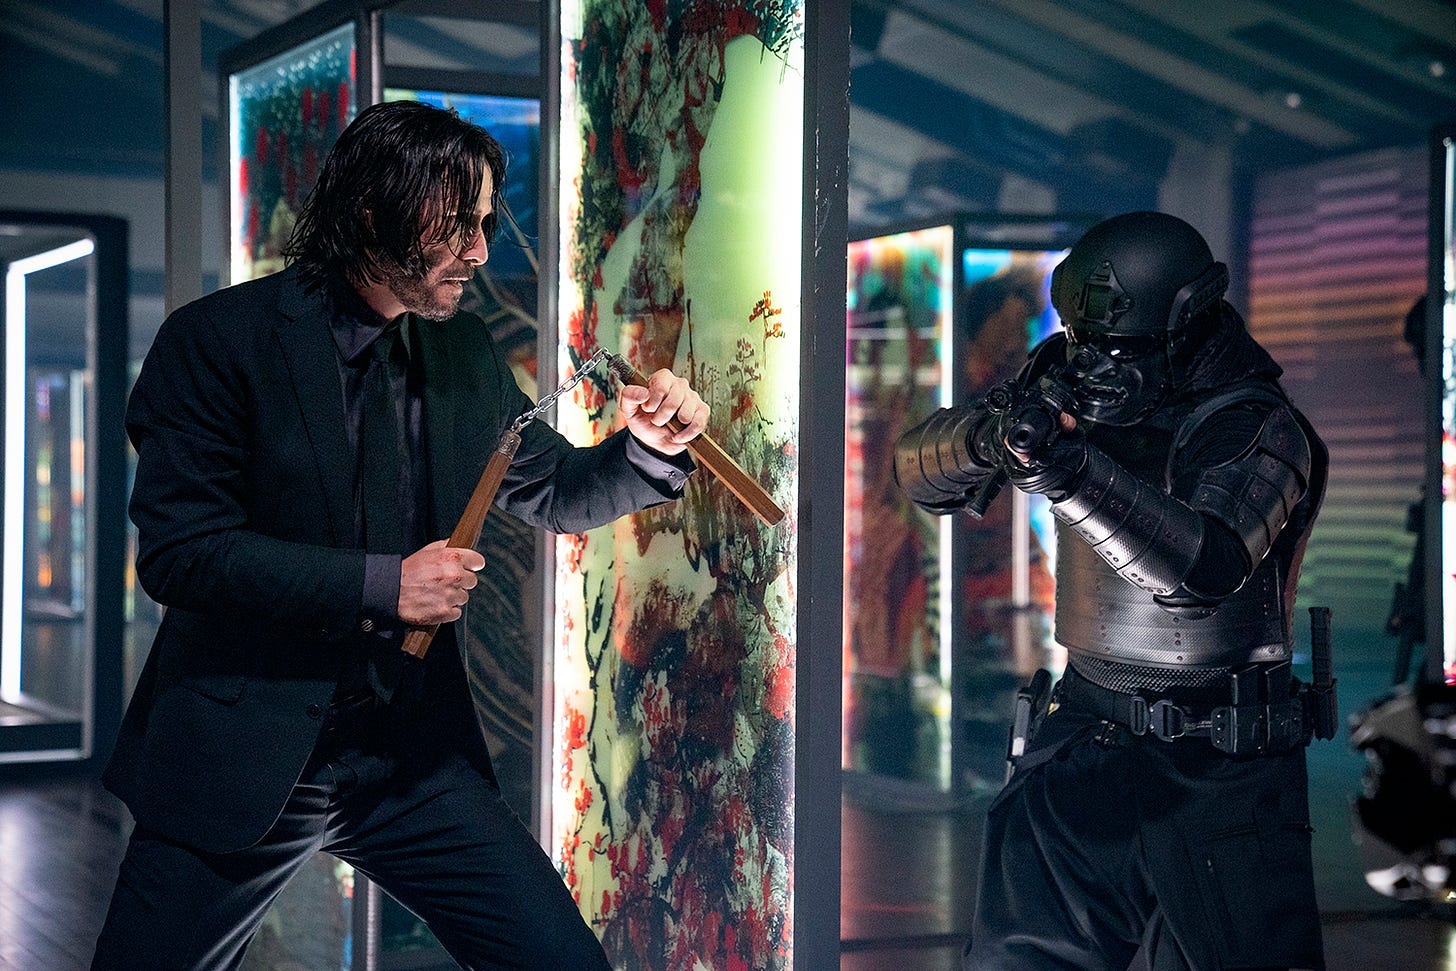 Keanu Reeves, as John Wick, holds nunchucks as he prepares to face off with an armored goon.